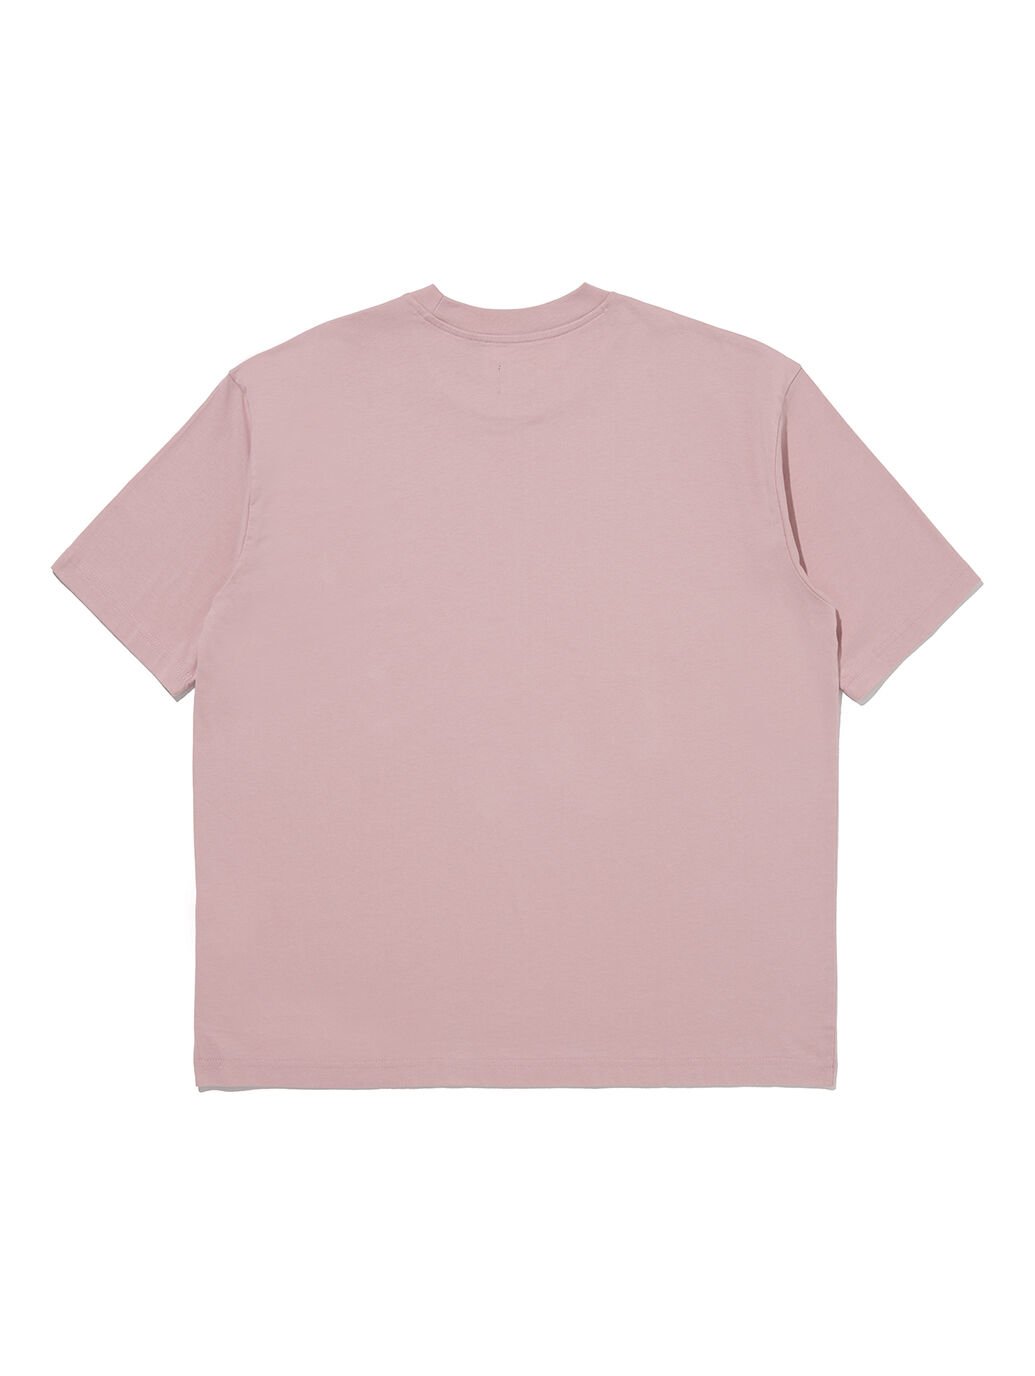 LEVI'S® SKATE グラフィック Tシャツ ピンク CORE PINK｜リーバイス 